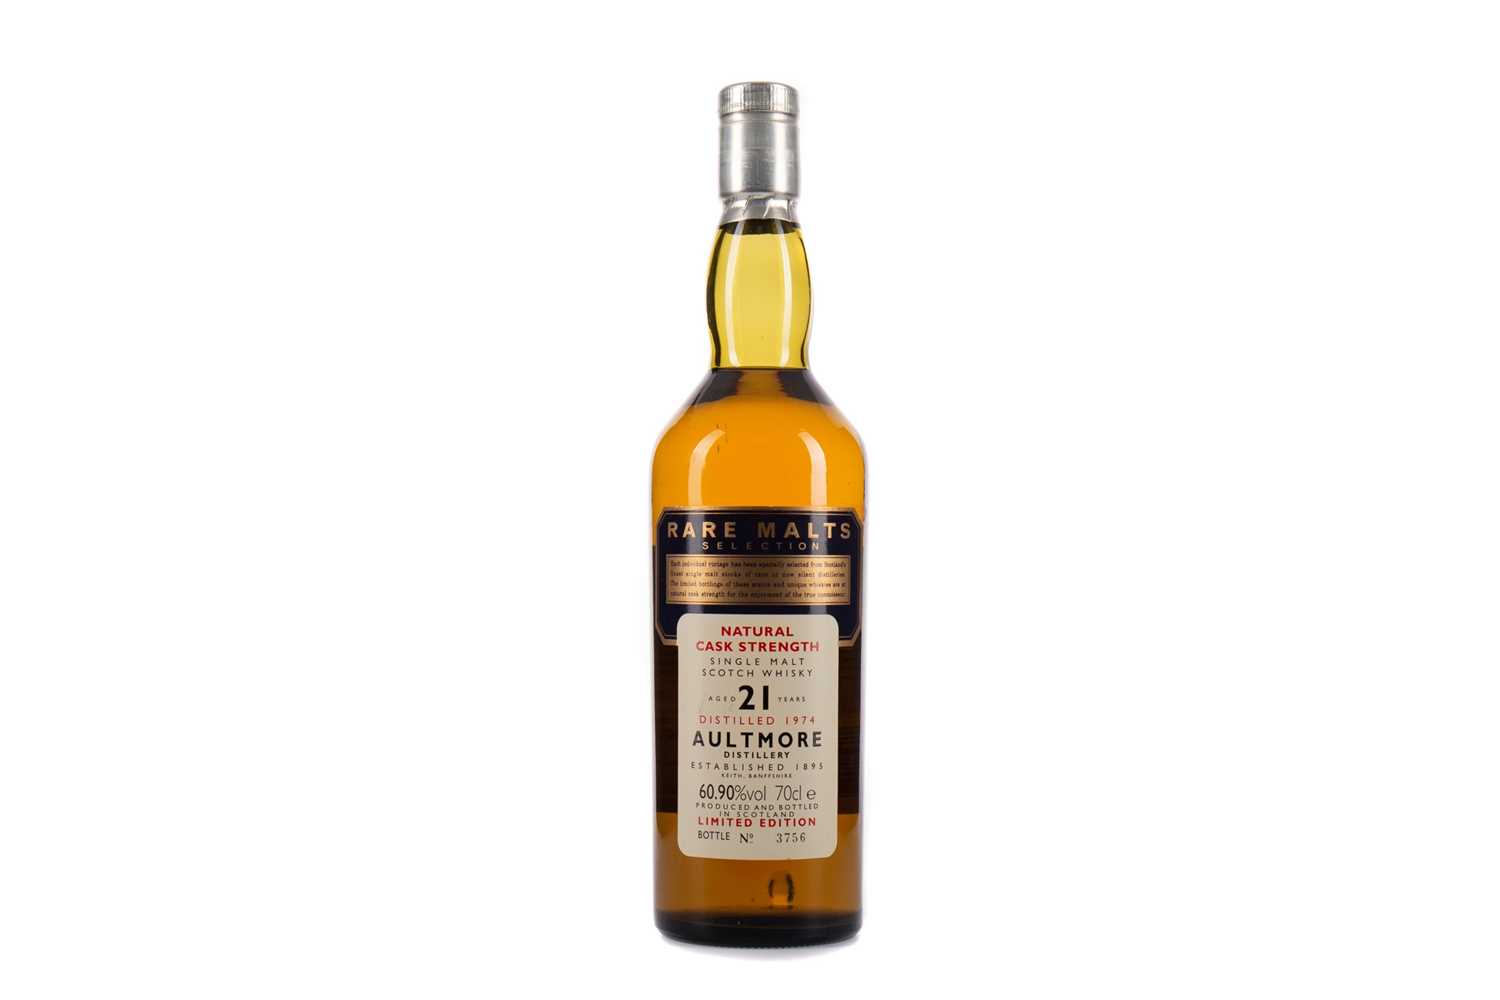 Lot 136 - AULTMORE 1974 RARE MALTS AGED 21 YEARS